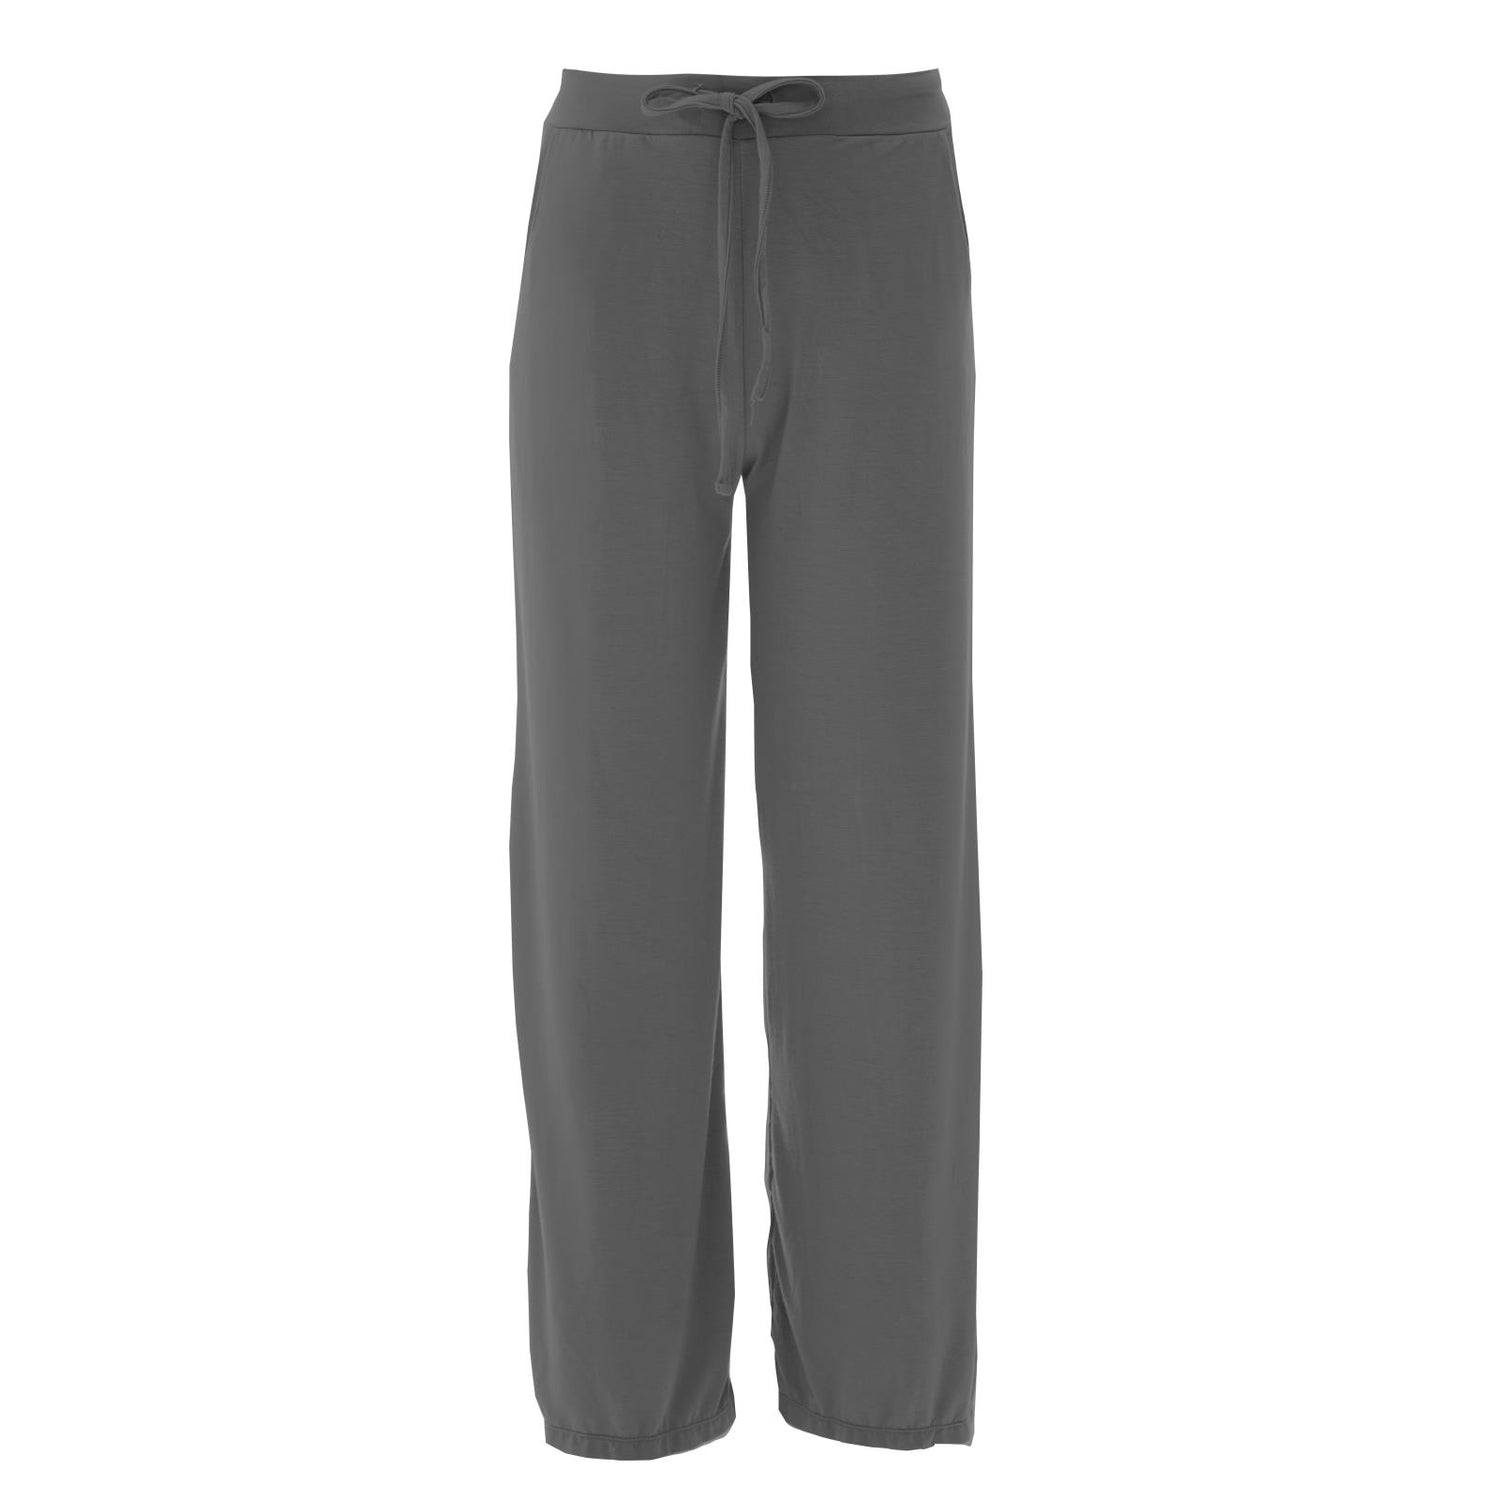 Women's Solid Lounge Pants in Pewter